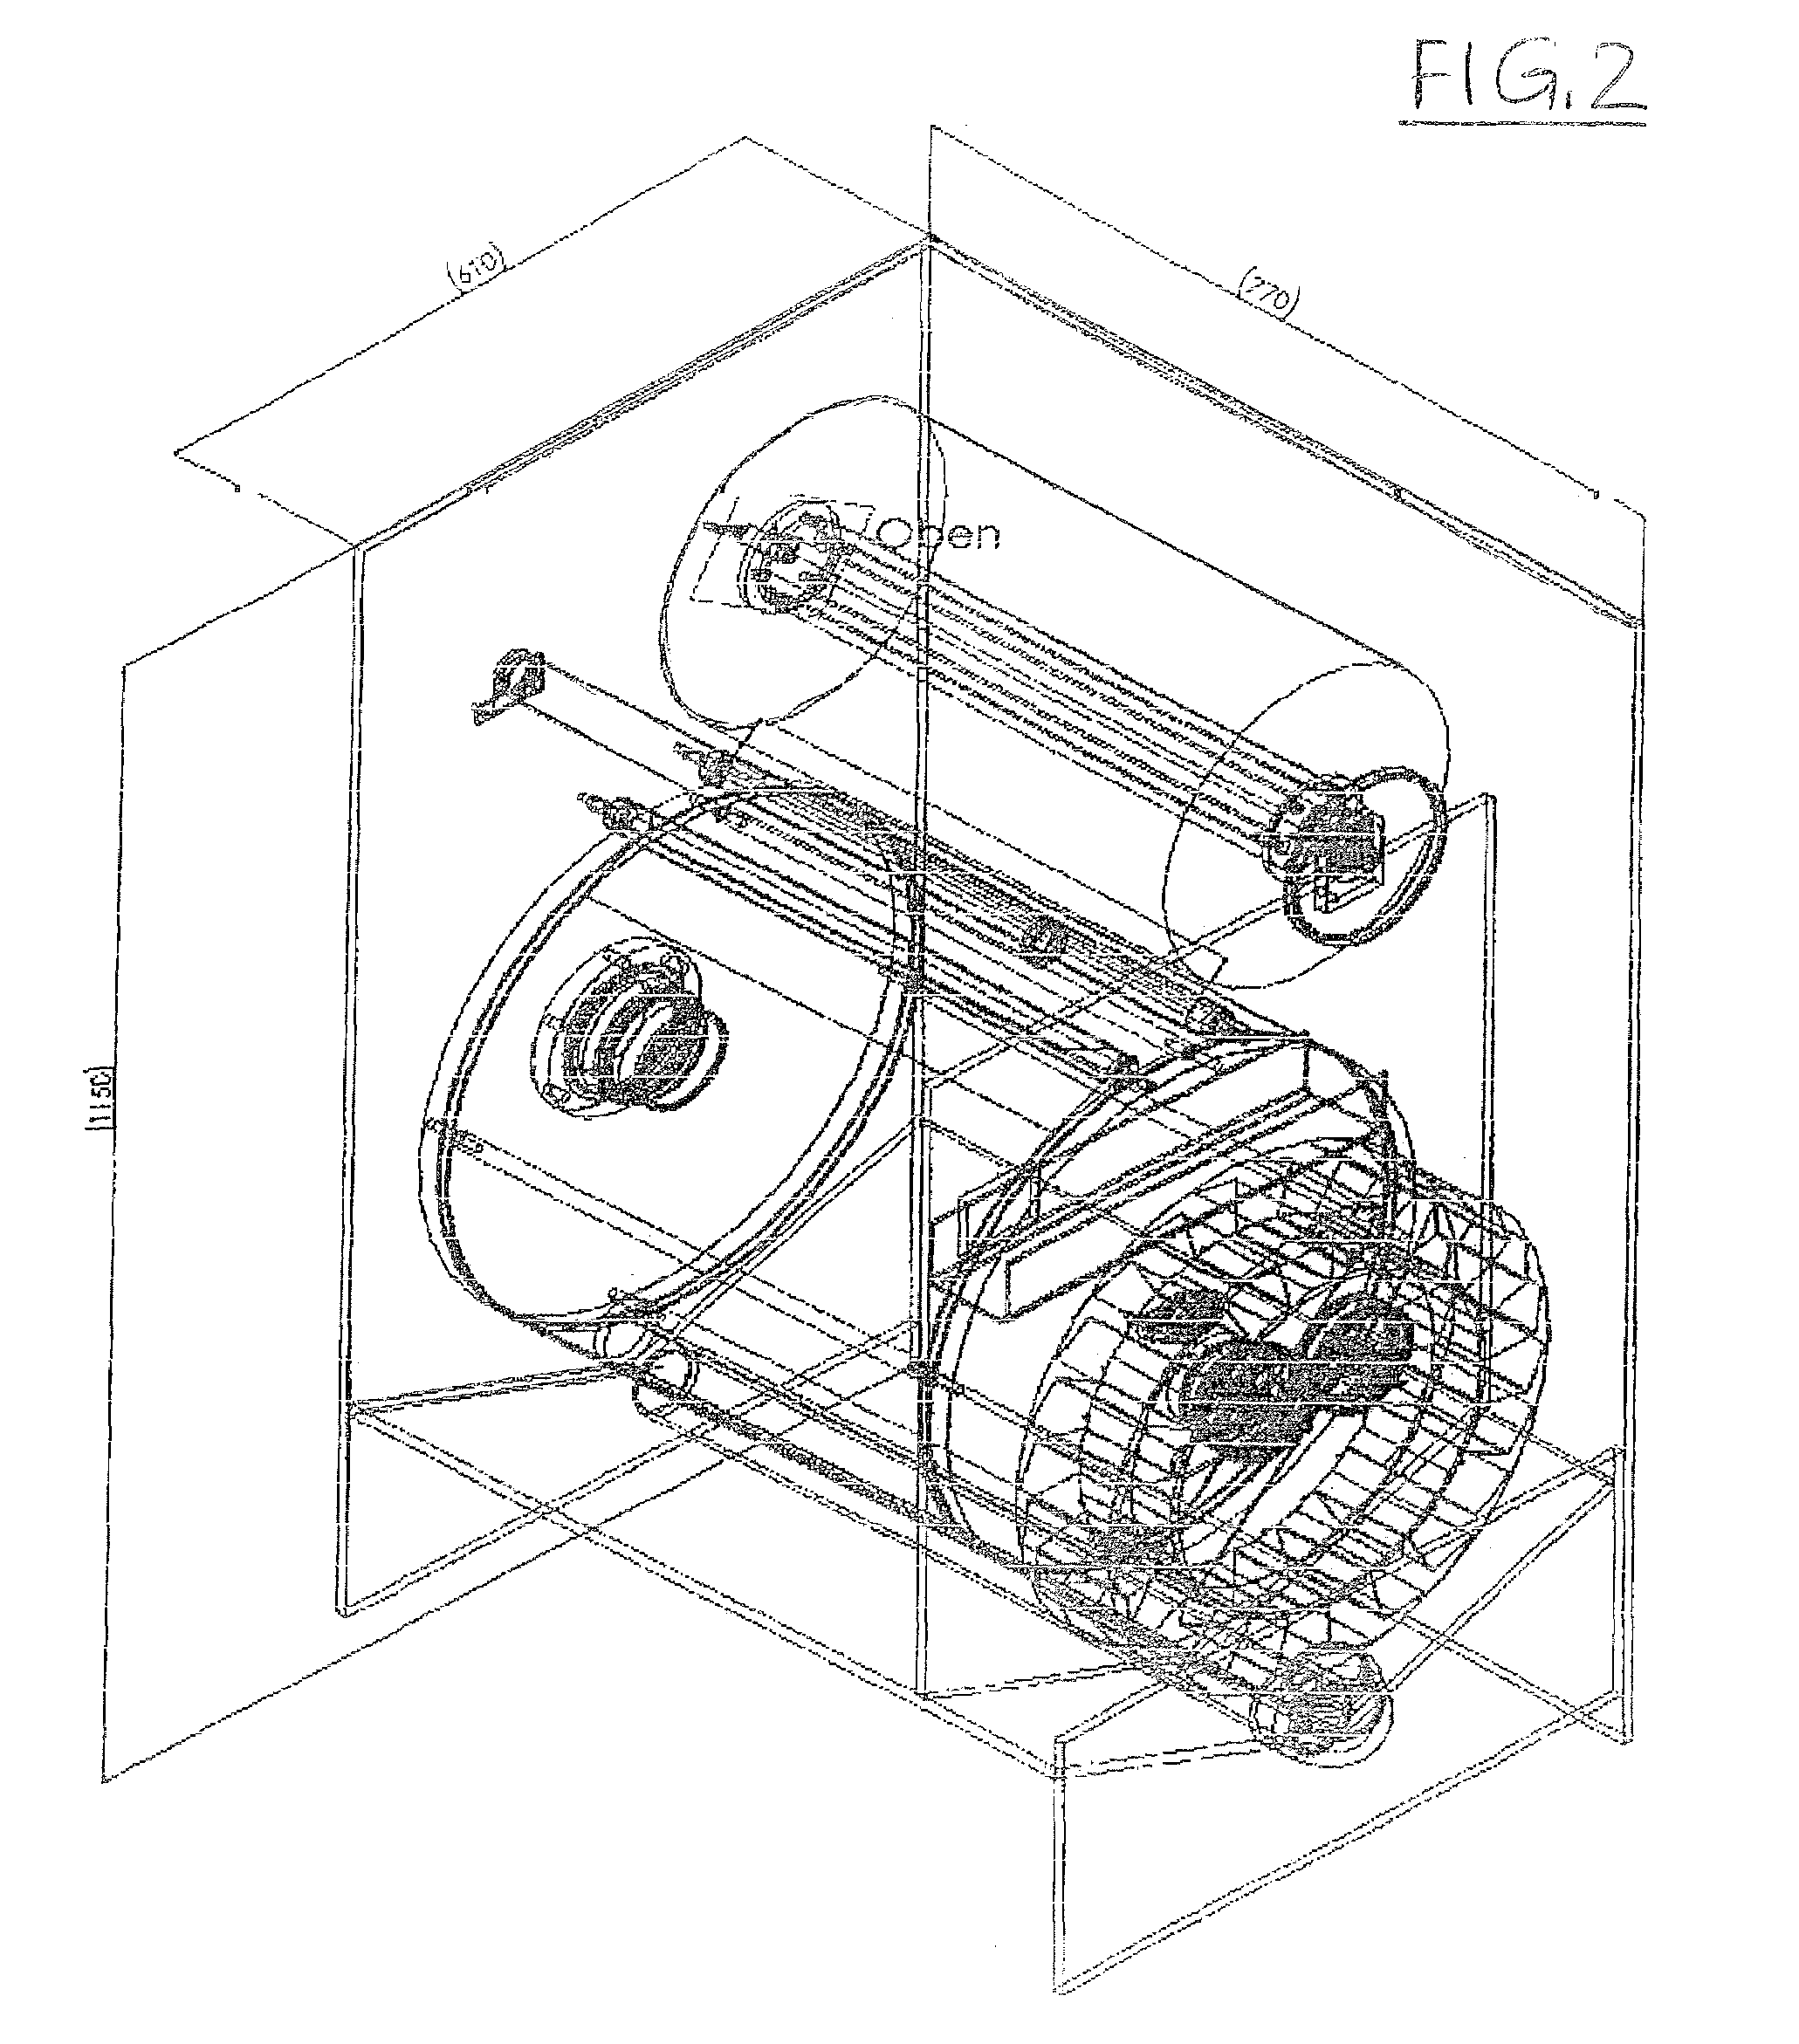 Filtering device, in particular for fish basins